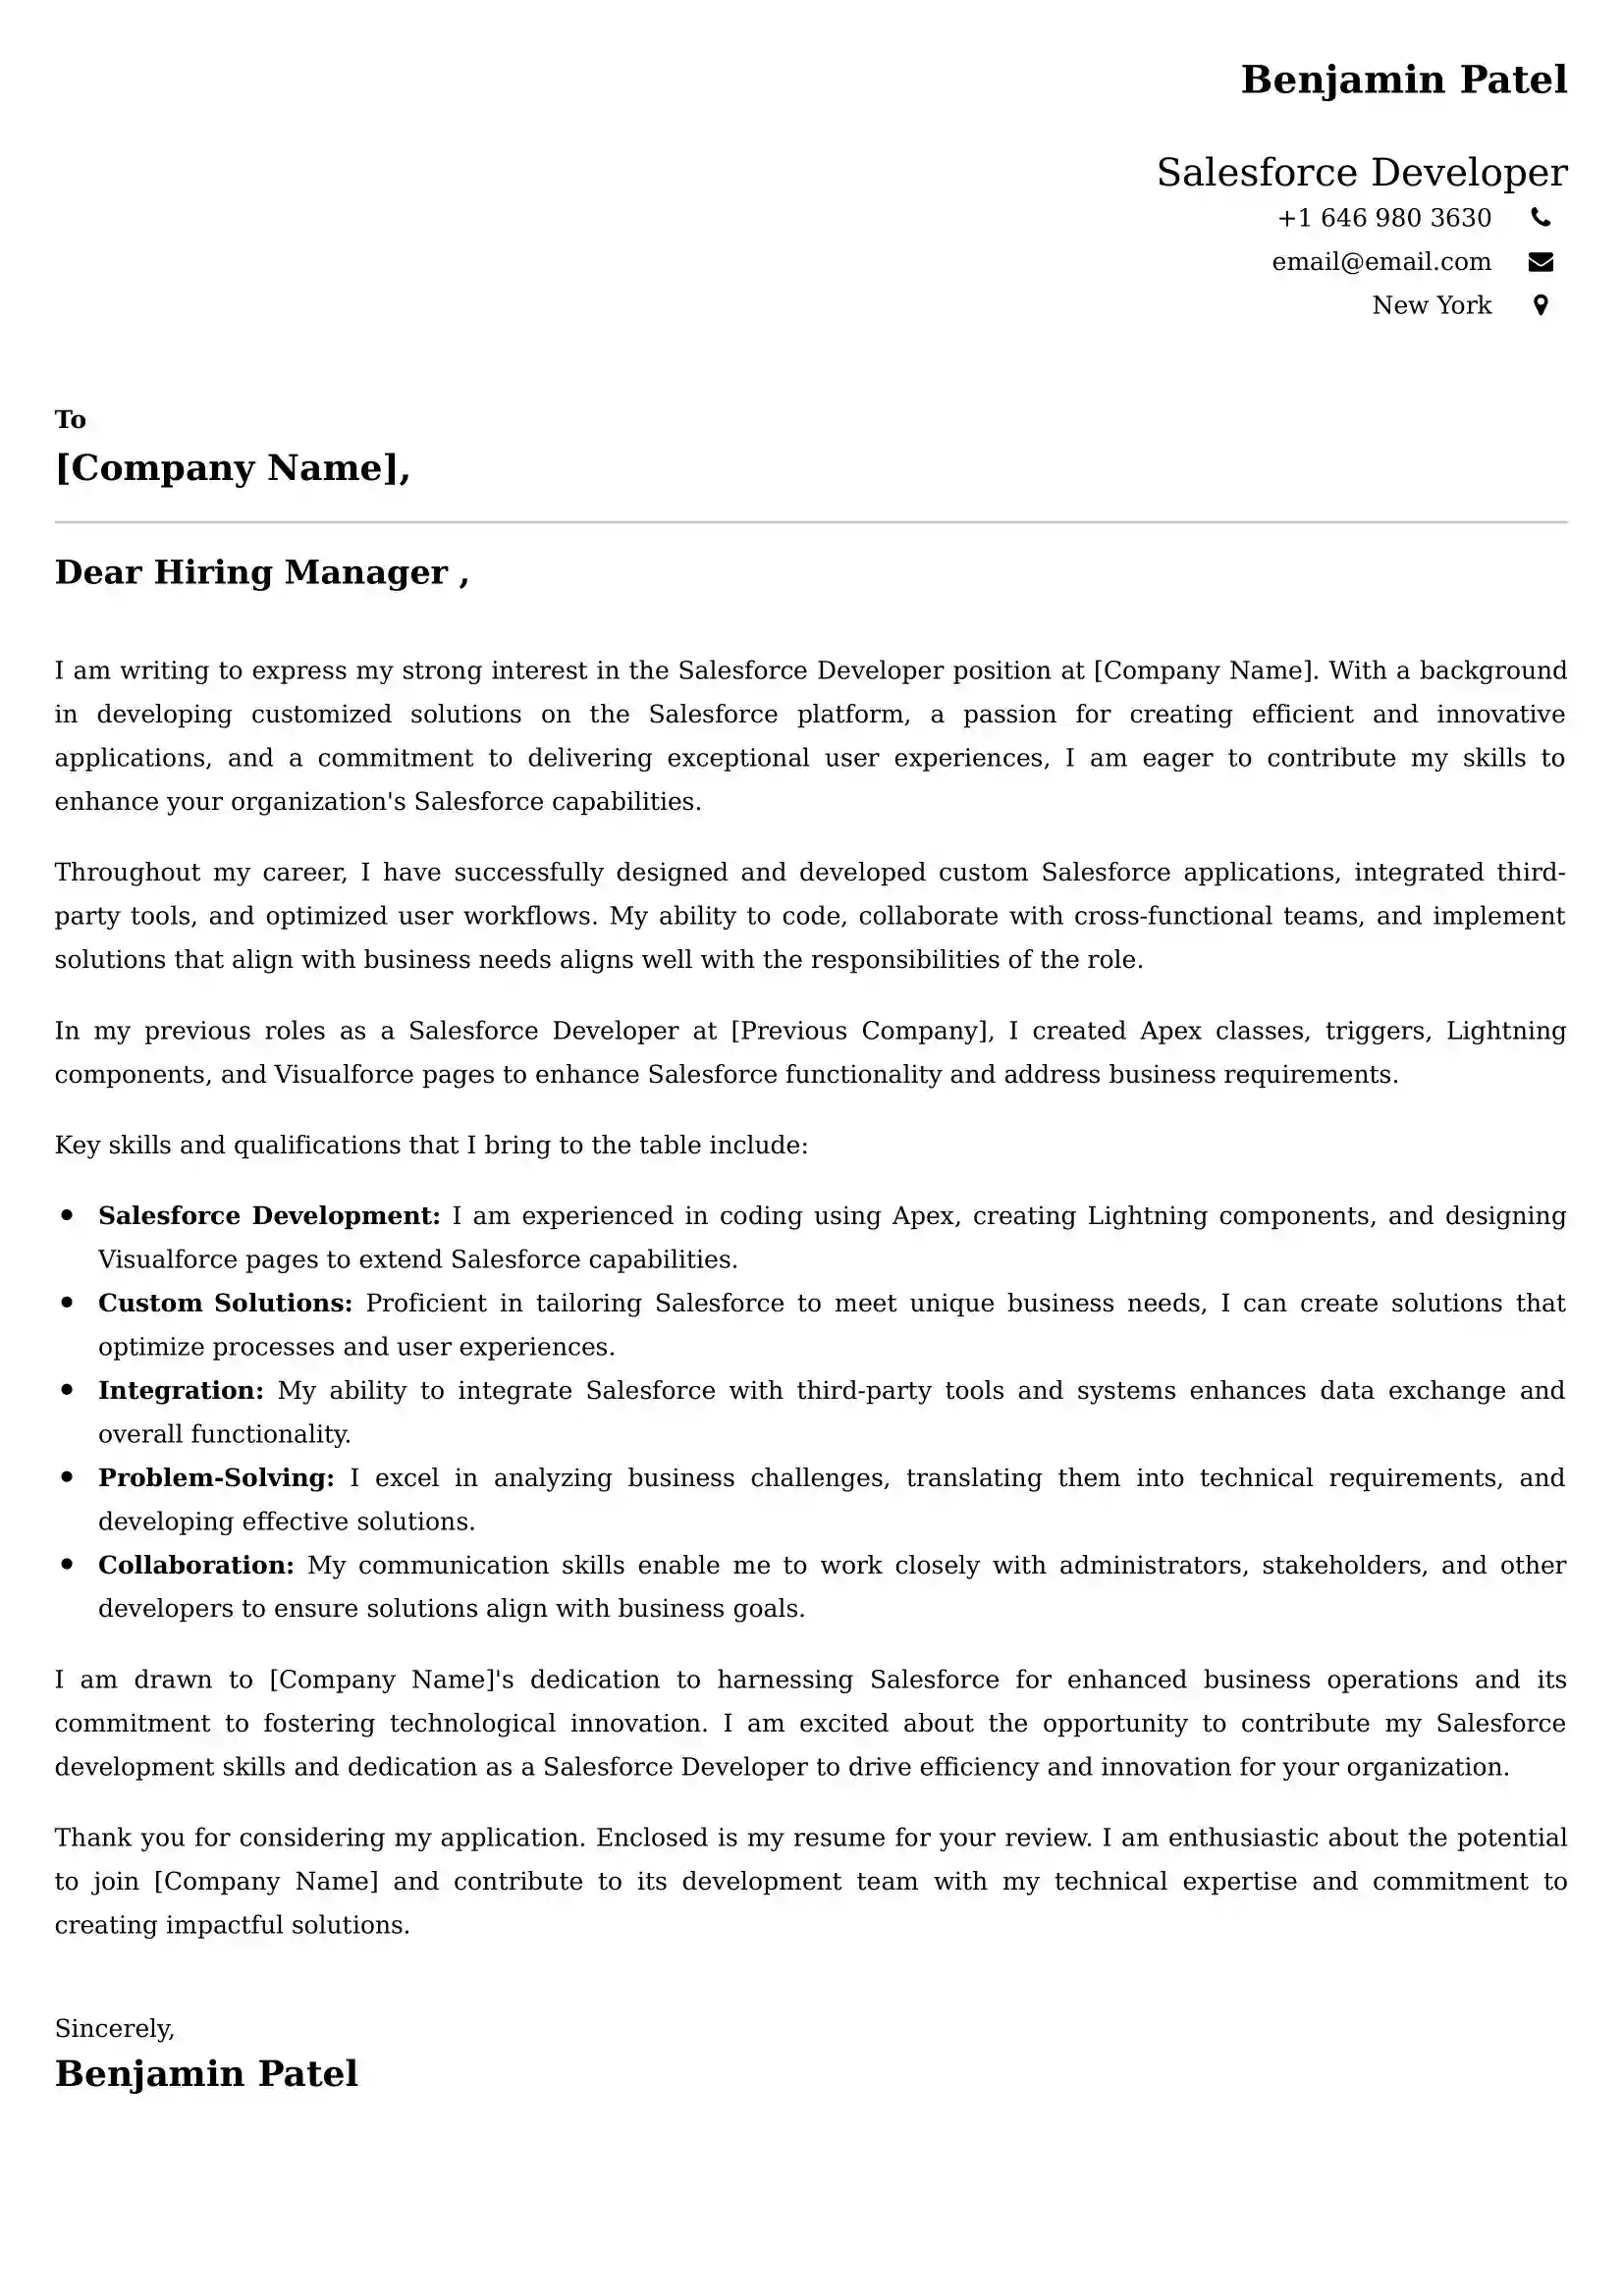 Salesforce Developer Cover Letter Samples Malaysia